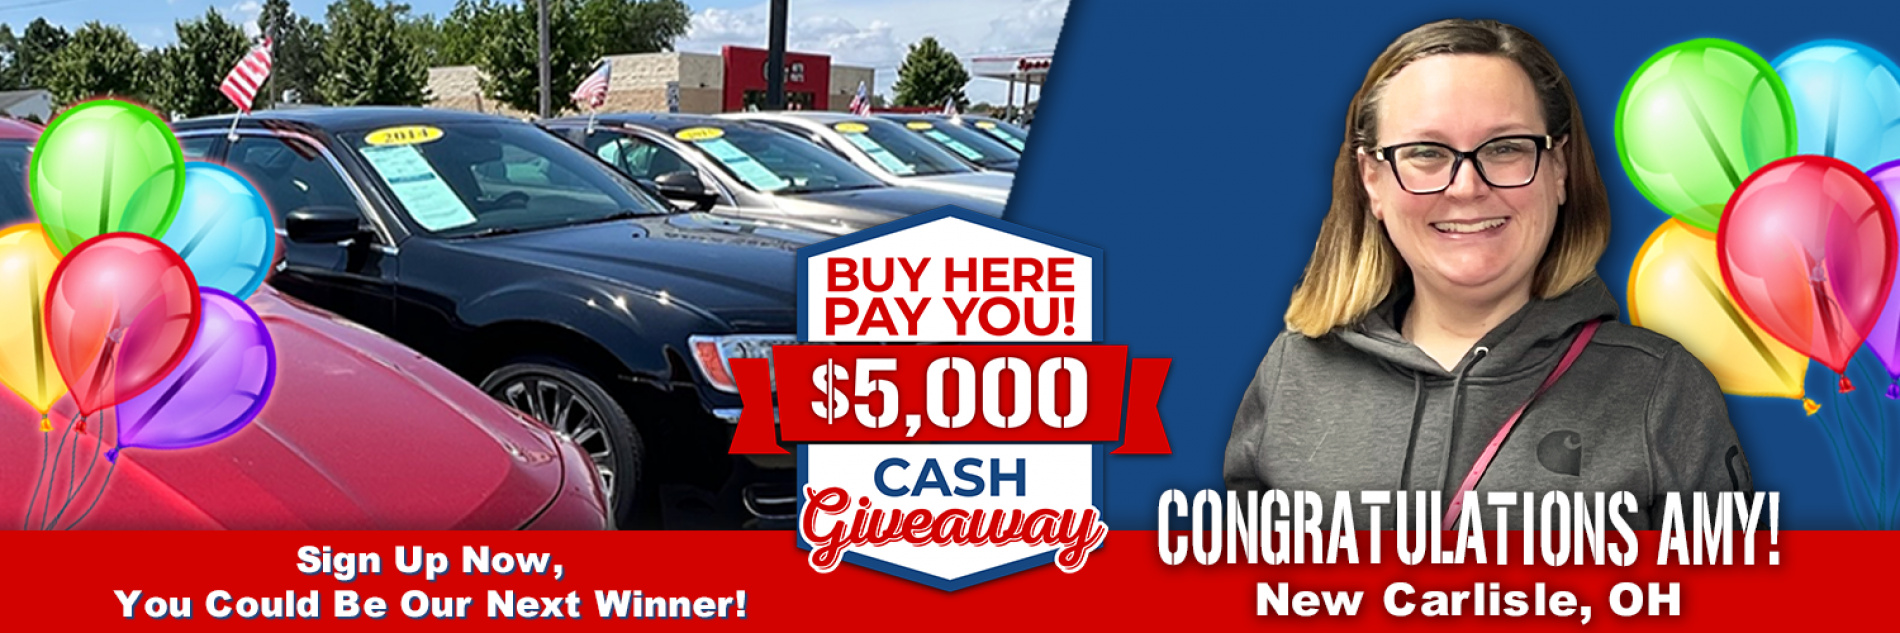 Advantage Car and Credit - Buy Here Pay You, 5000 dollar cash giveaway*